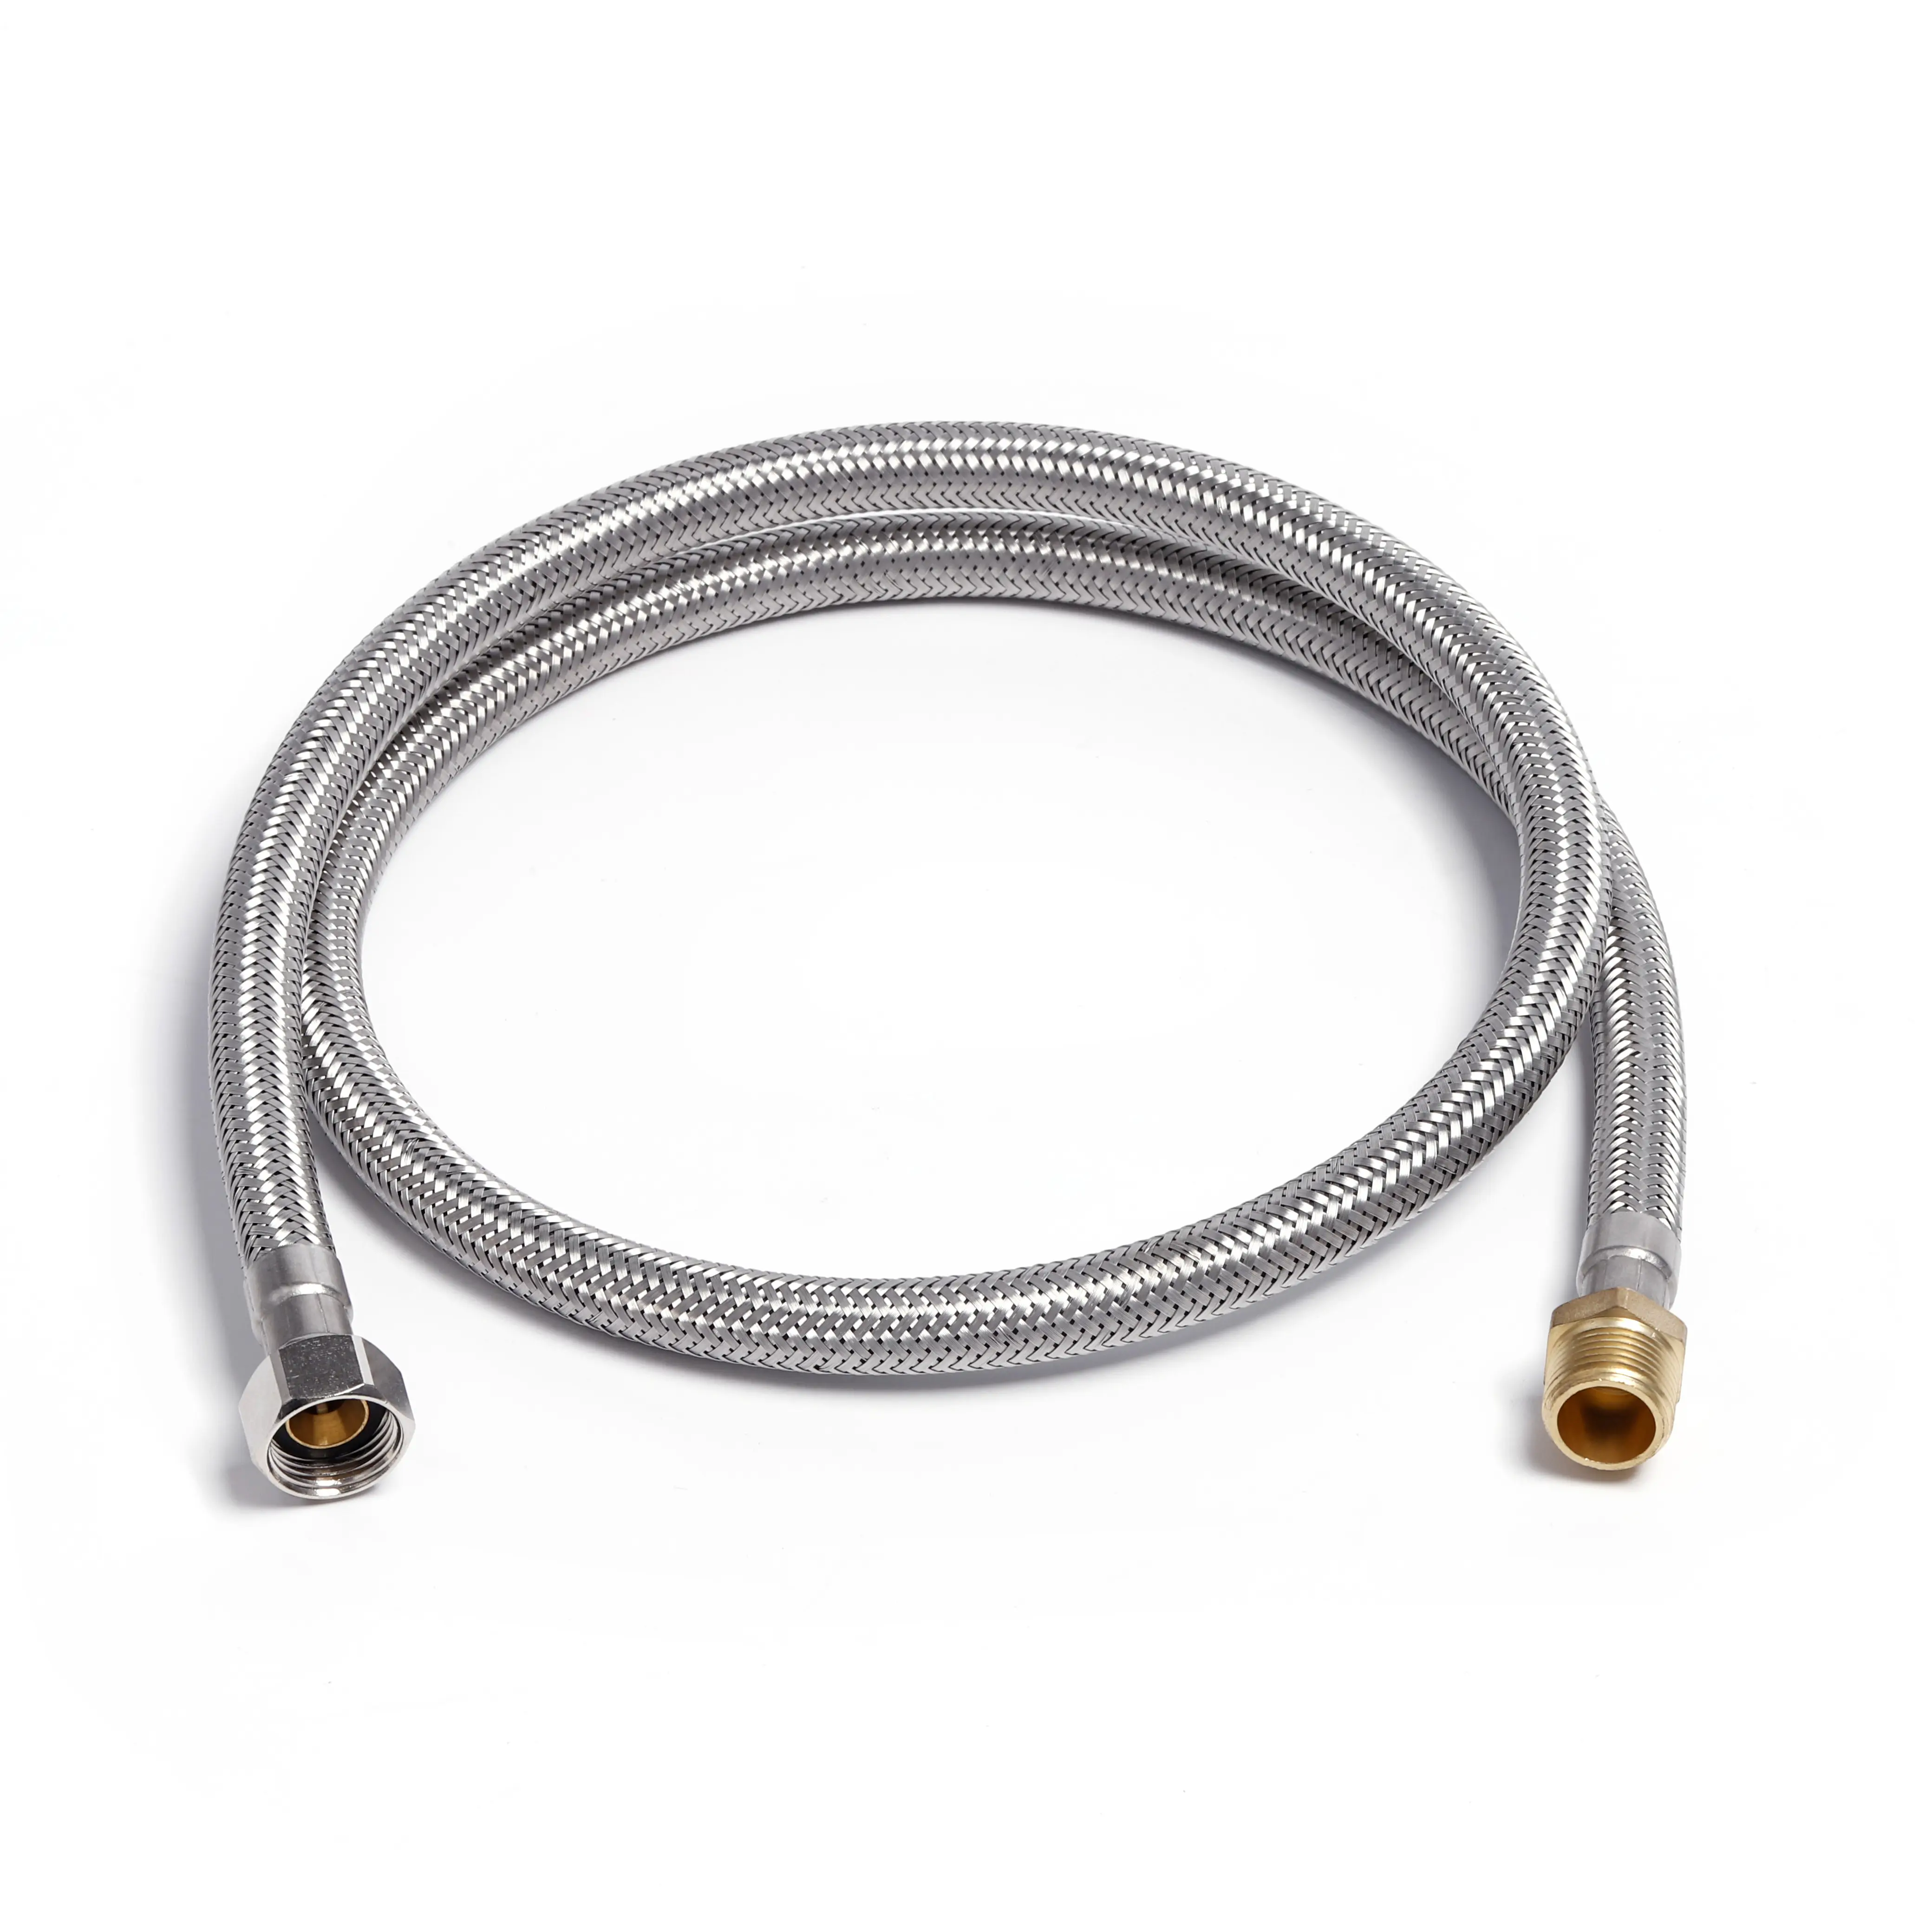 Bathroom Kitchen Faucet Connector Braided Stainless Steel Supply Hose 3/8-Inch Female Thread X M10*1 Male Connector